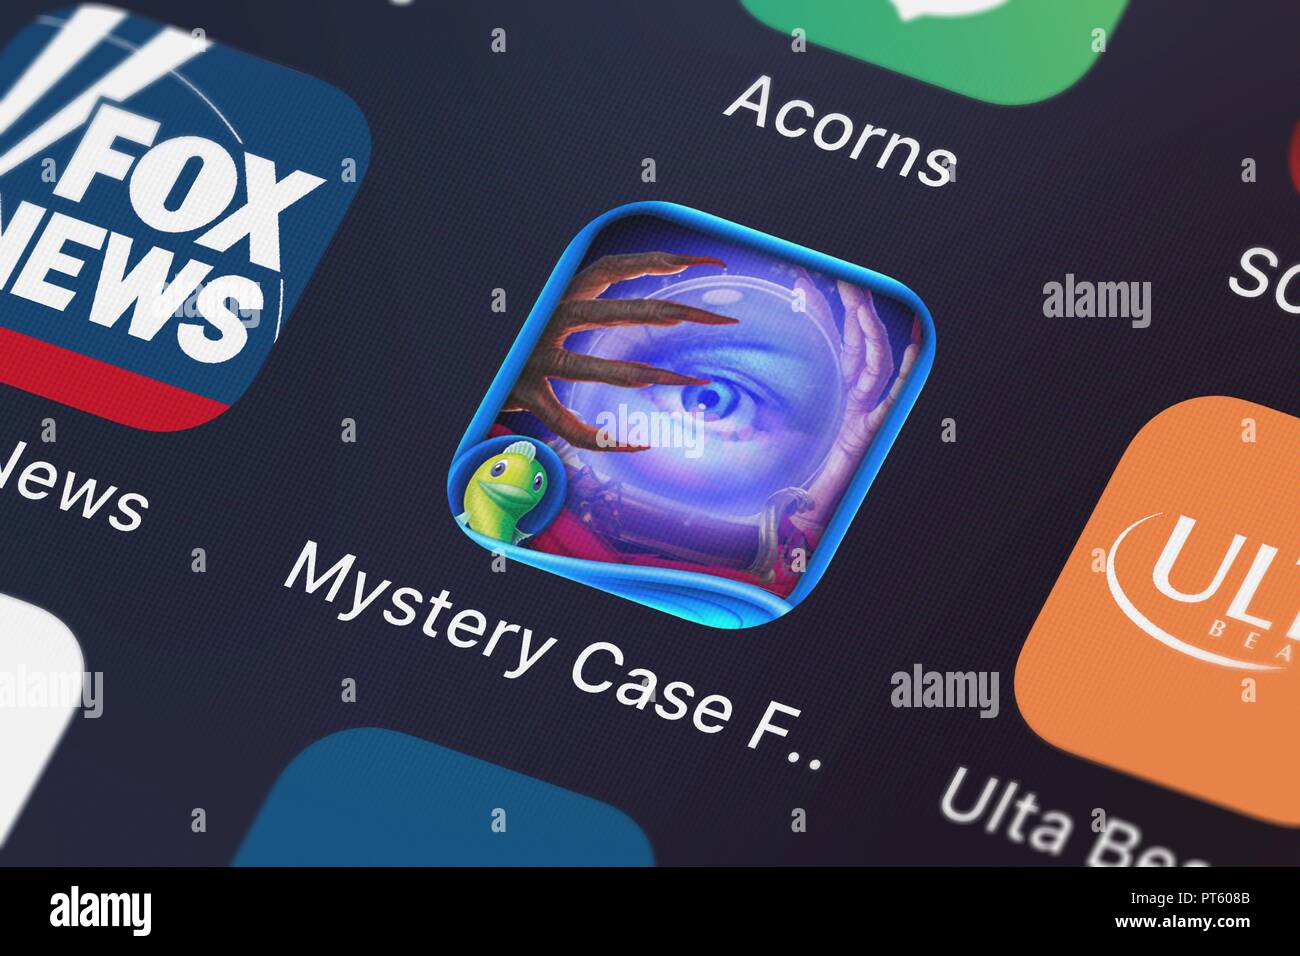 London, United Kingdom - October 06, 2018: Close-up shot of the Mystery Case Files: Madame Fate (Full) application icon from Big Fish Games, Inc on an Stock Photo